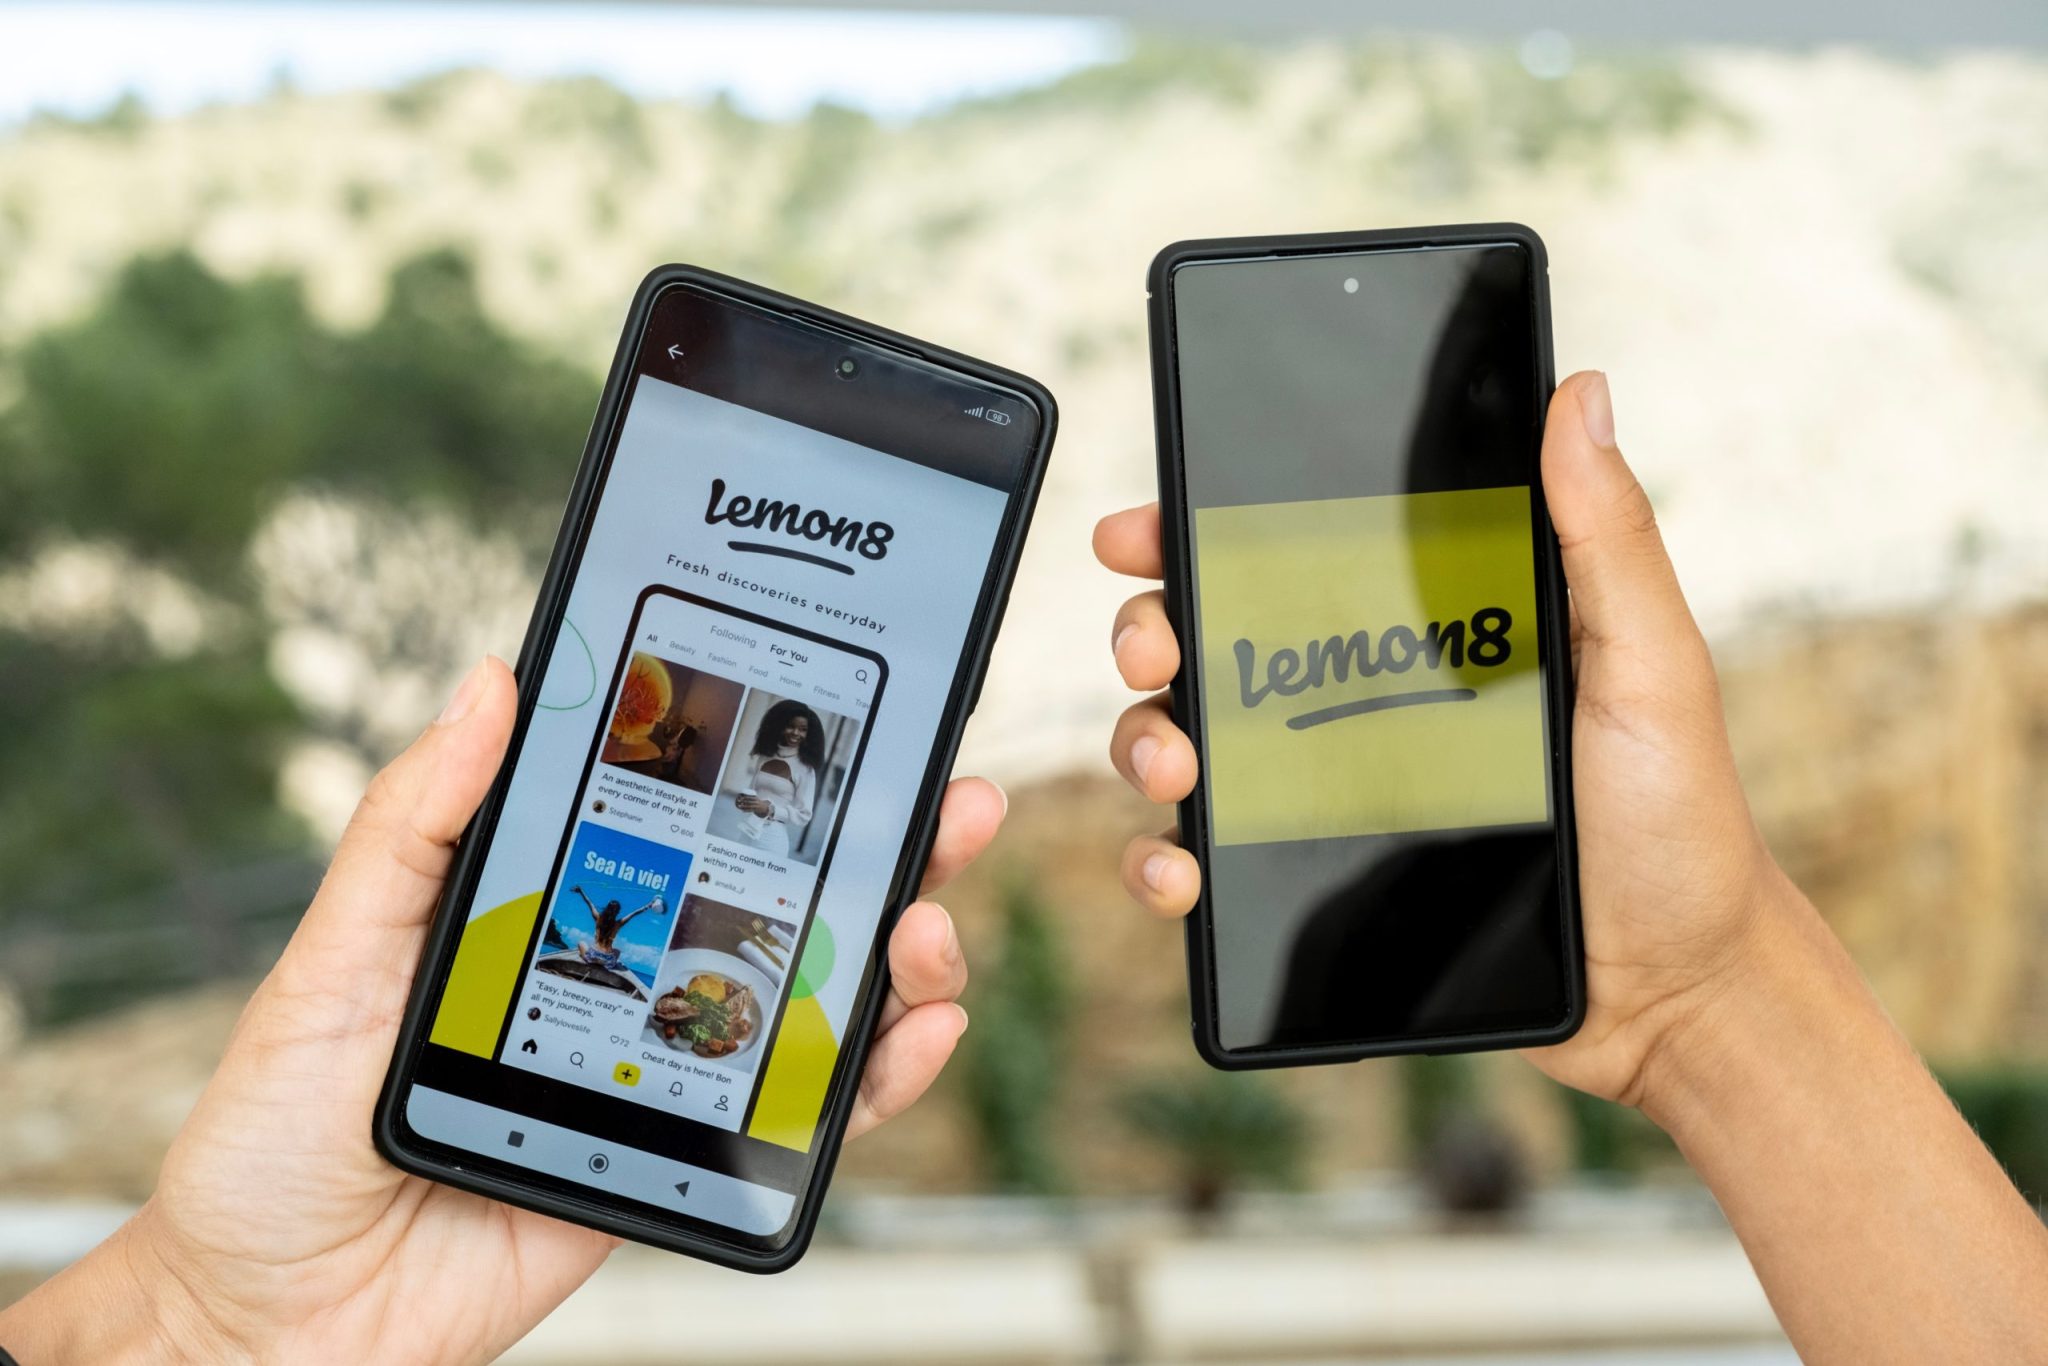 Two smartphones with content sharing platform Lemon8 app on the screen.